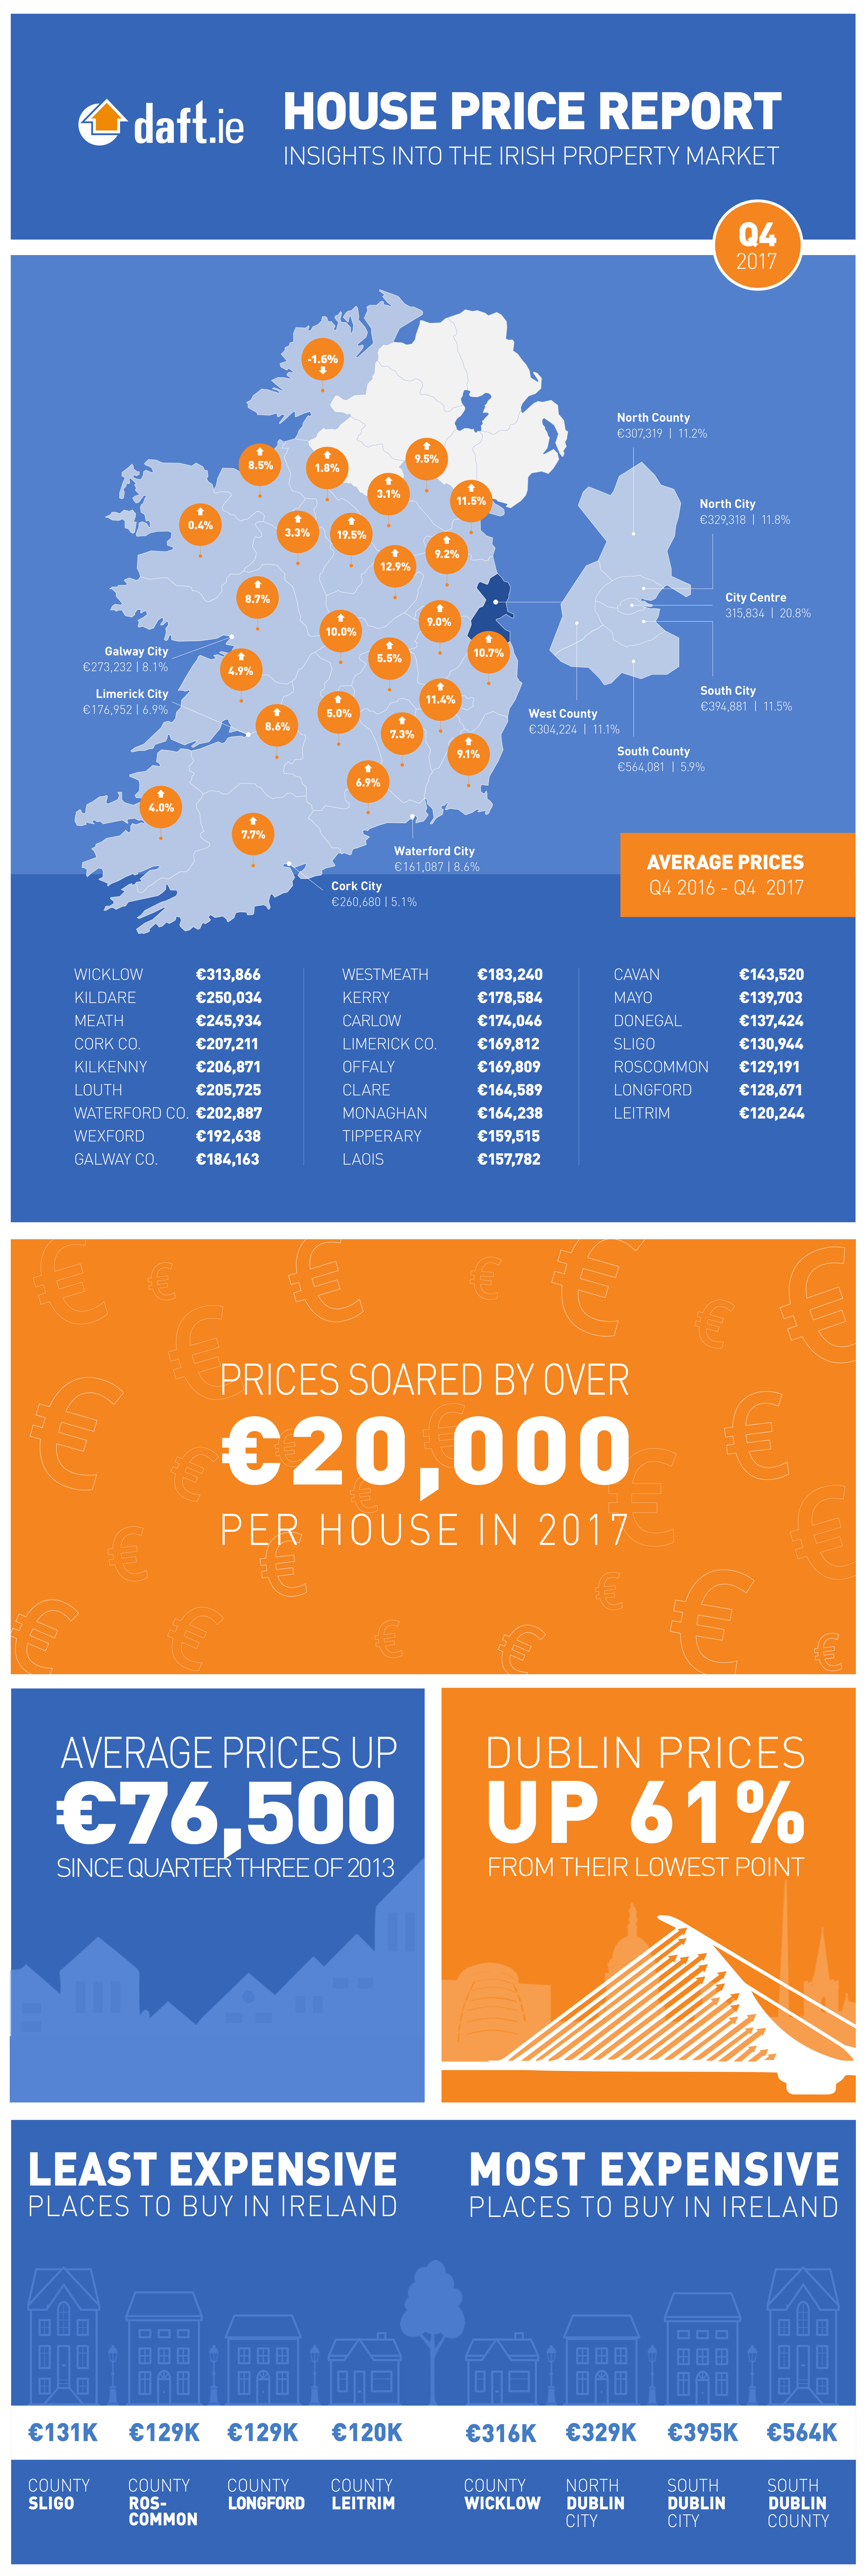 Daft.ie House Price Report: Q4 2017 Infographic